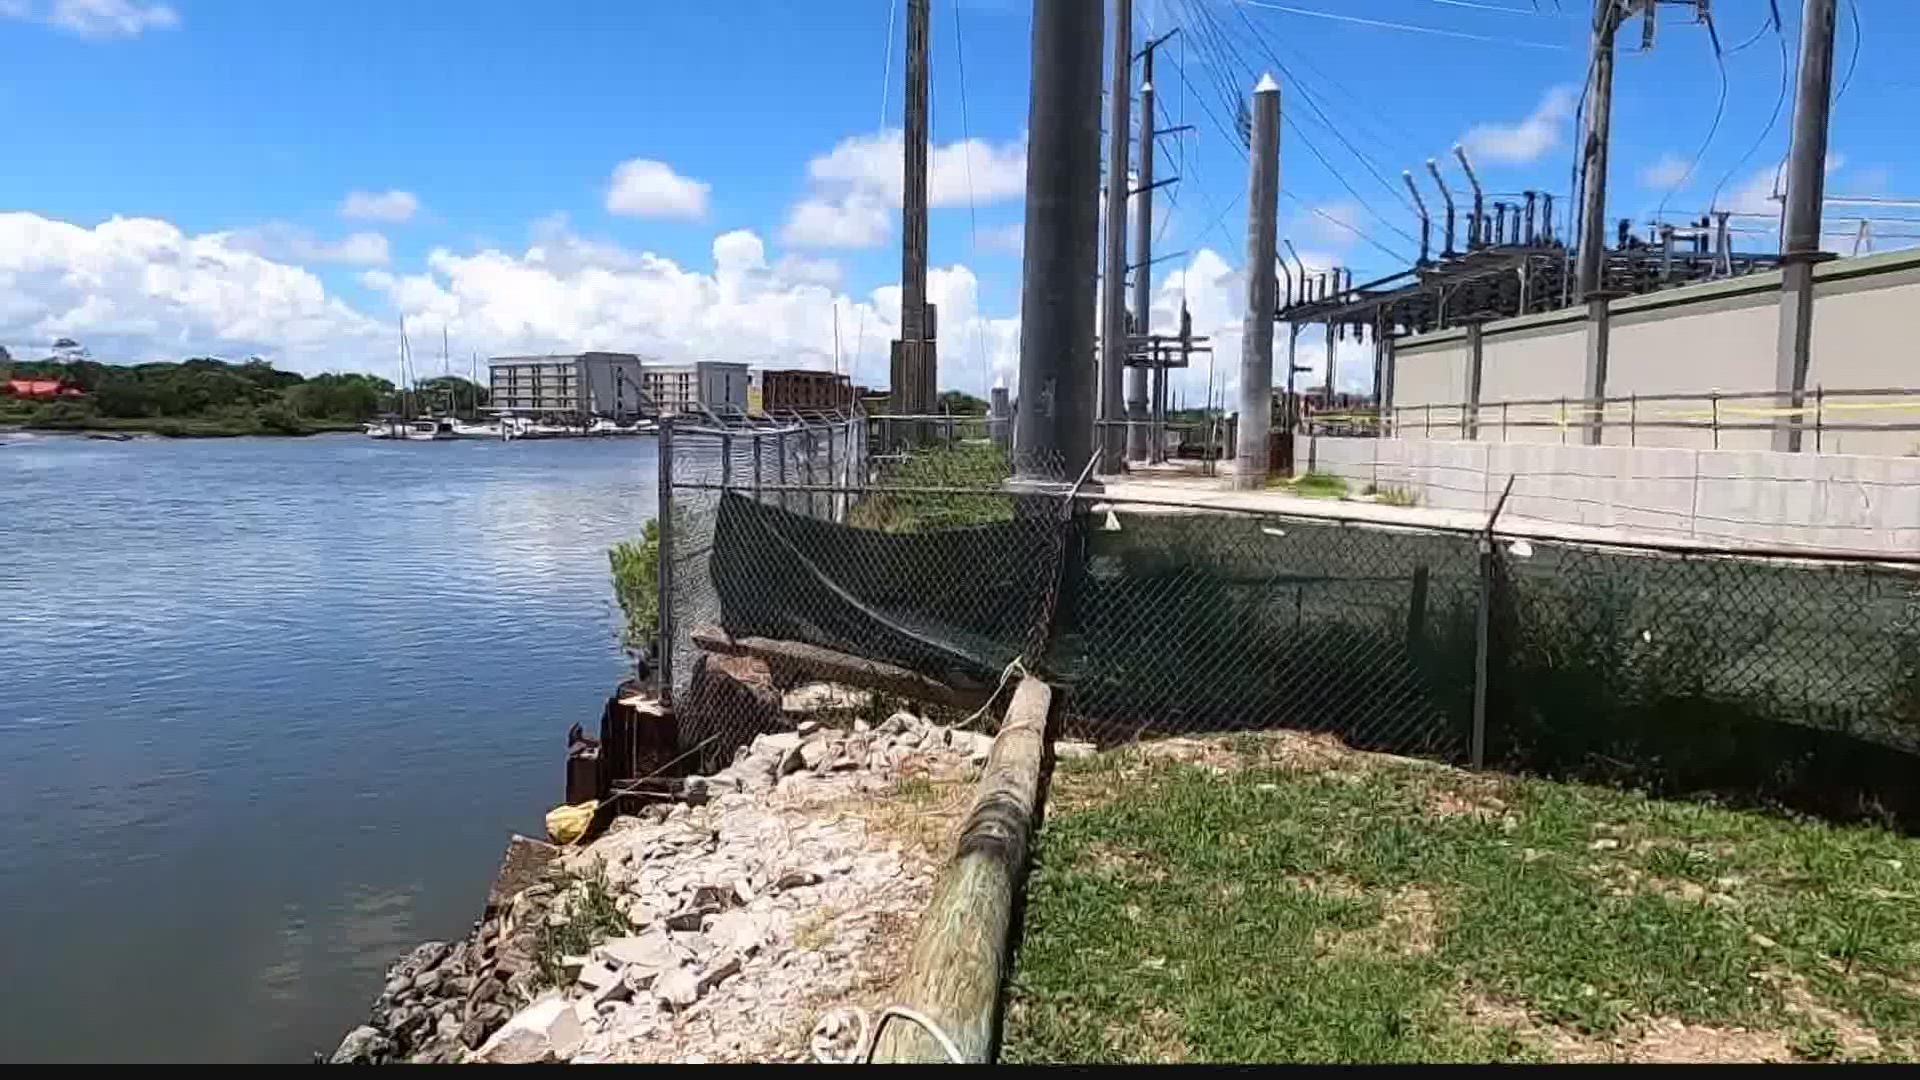 There are two major projects in St. Augustine that aim to make the city more resilient to floods.